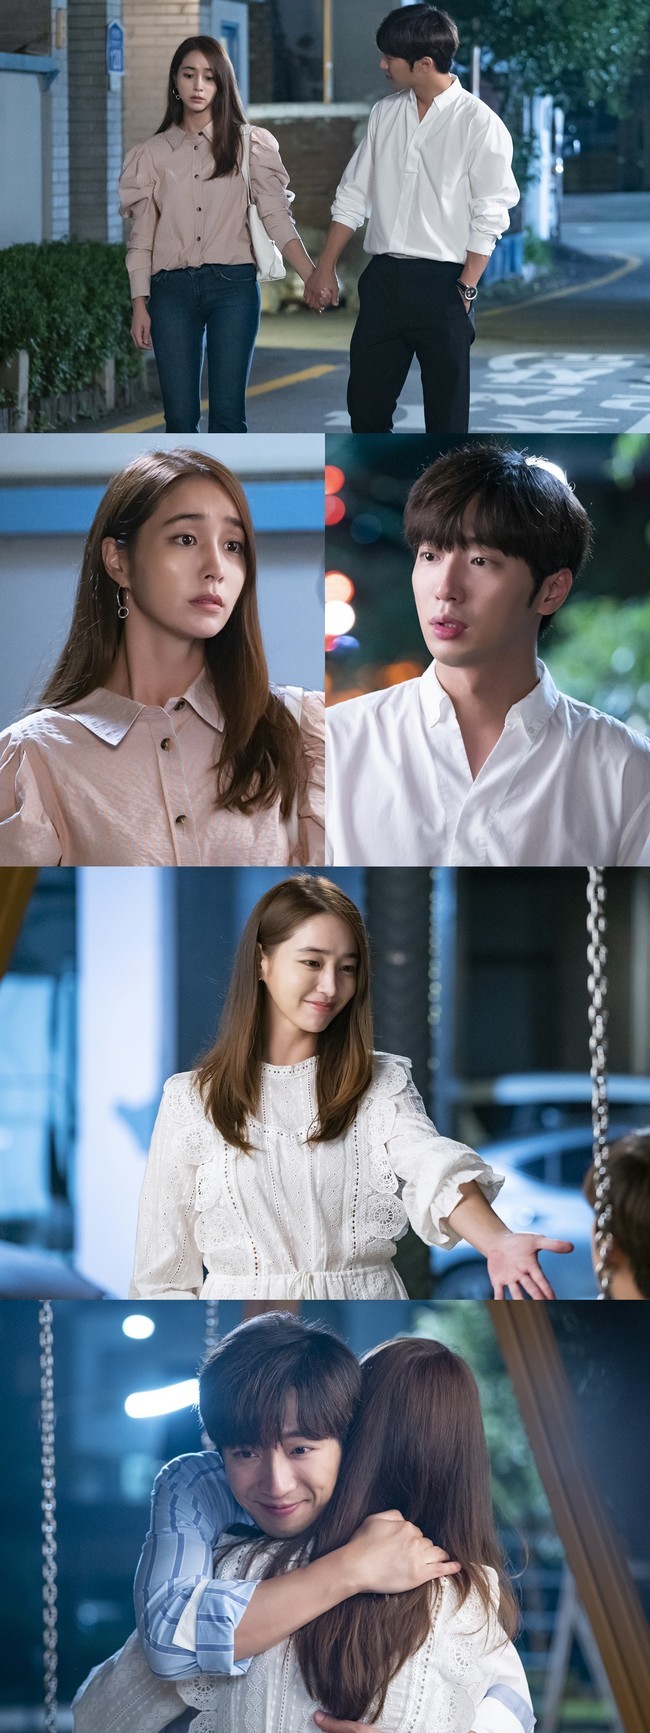 I went once Lee Min-jung, Lee Sang-yeob How will the relationship flow?KBS 2TV weekend drama Ive Goed Once (playplay by Yang Hee-seung, An-Am, Director Lee Jae-sang, Production Studio Dragon, Bon Factory) This weeks broadcast depicts Lee Min-jung (played by Song Na-hee) and Lee Sang-yeob (played by Yoon Kyu-Jin) who travel between Feelings roller coasters.Previously, the relationship between the characters changed rapidly and new developments were encountered.Choi Yoon-jung (Kim Bo-yeon) opened his mind to Song Na-hee (Lee Min-jung), who kept himself silently insecure during the dementia clinic counseling, and Jang Ok-bun (Cha Hwa-yeon) and Yoon Kyu-Jin (Lee Sang-yeob) cleaned up the remaining Feeling and smiled brightly after having a sincere conversation. Something.On the other hand, in the public photos, Song Na Hee and Yoon Kyu-Jin, who show different Feelings, are caught and added to the interest.Song Na-hee, who looks at her mothers worry and looks at her with a worried look, and the moment of Yoon Kyu-Jin looking at her.The appearance of two people who seem to reach is a sense of meaningful development.In addition, it is revealed that you enjoy a sweet date, which makes viewers tremble.Song Na-hee, who gives a hand to Yoon Kyu-Jin with a dripping eye, and Yoon Kyu-Jin, who embraced her as if she were lovely, warms the hearts of those who see her.Park Su-in